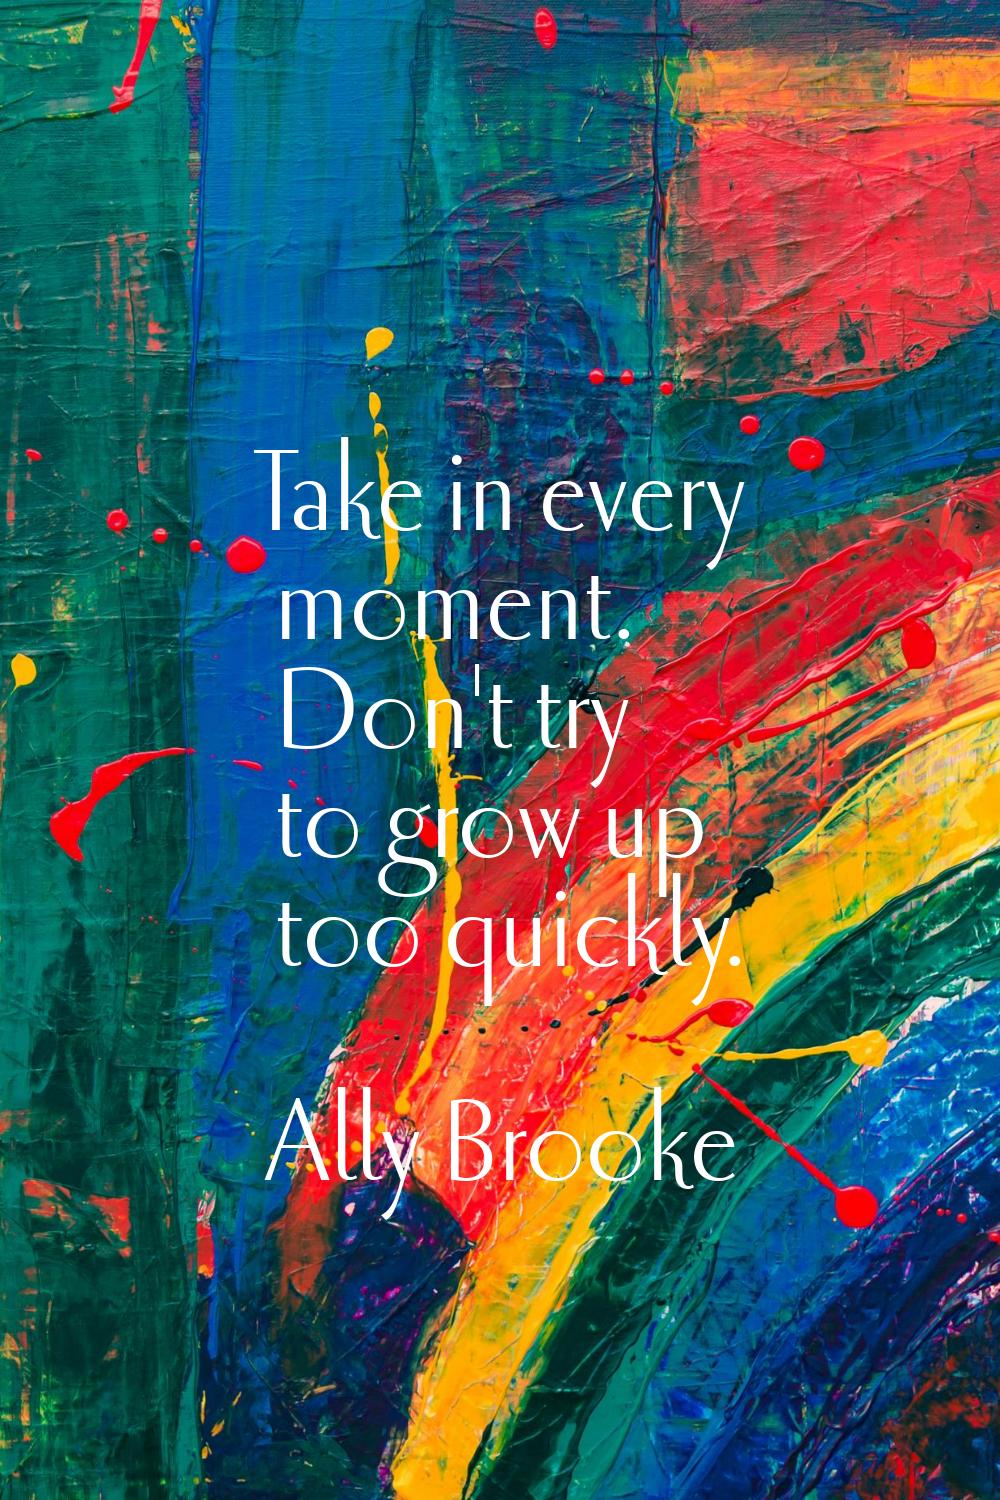 Take in every moment. Don't try to grow up too quickly.